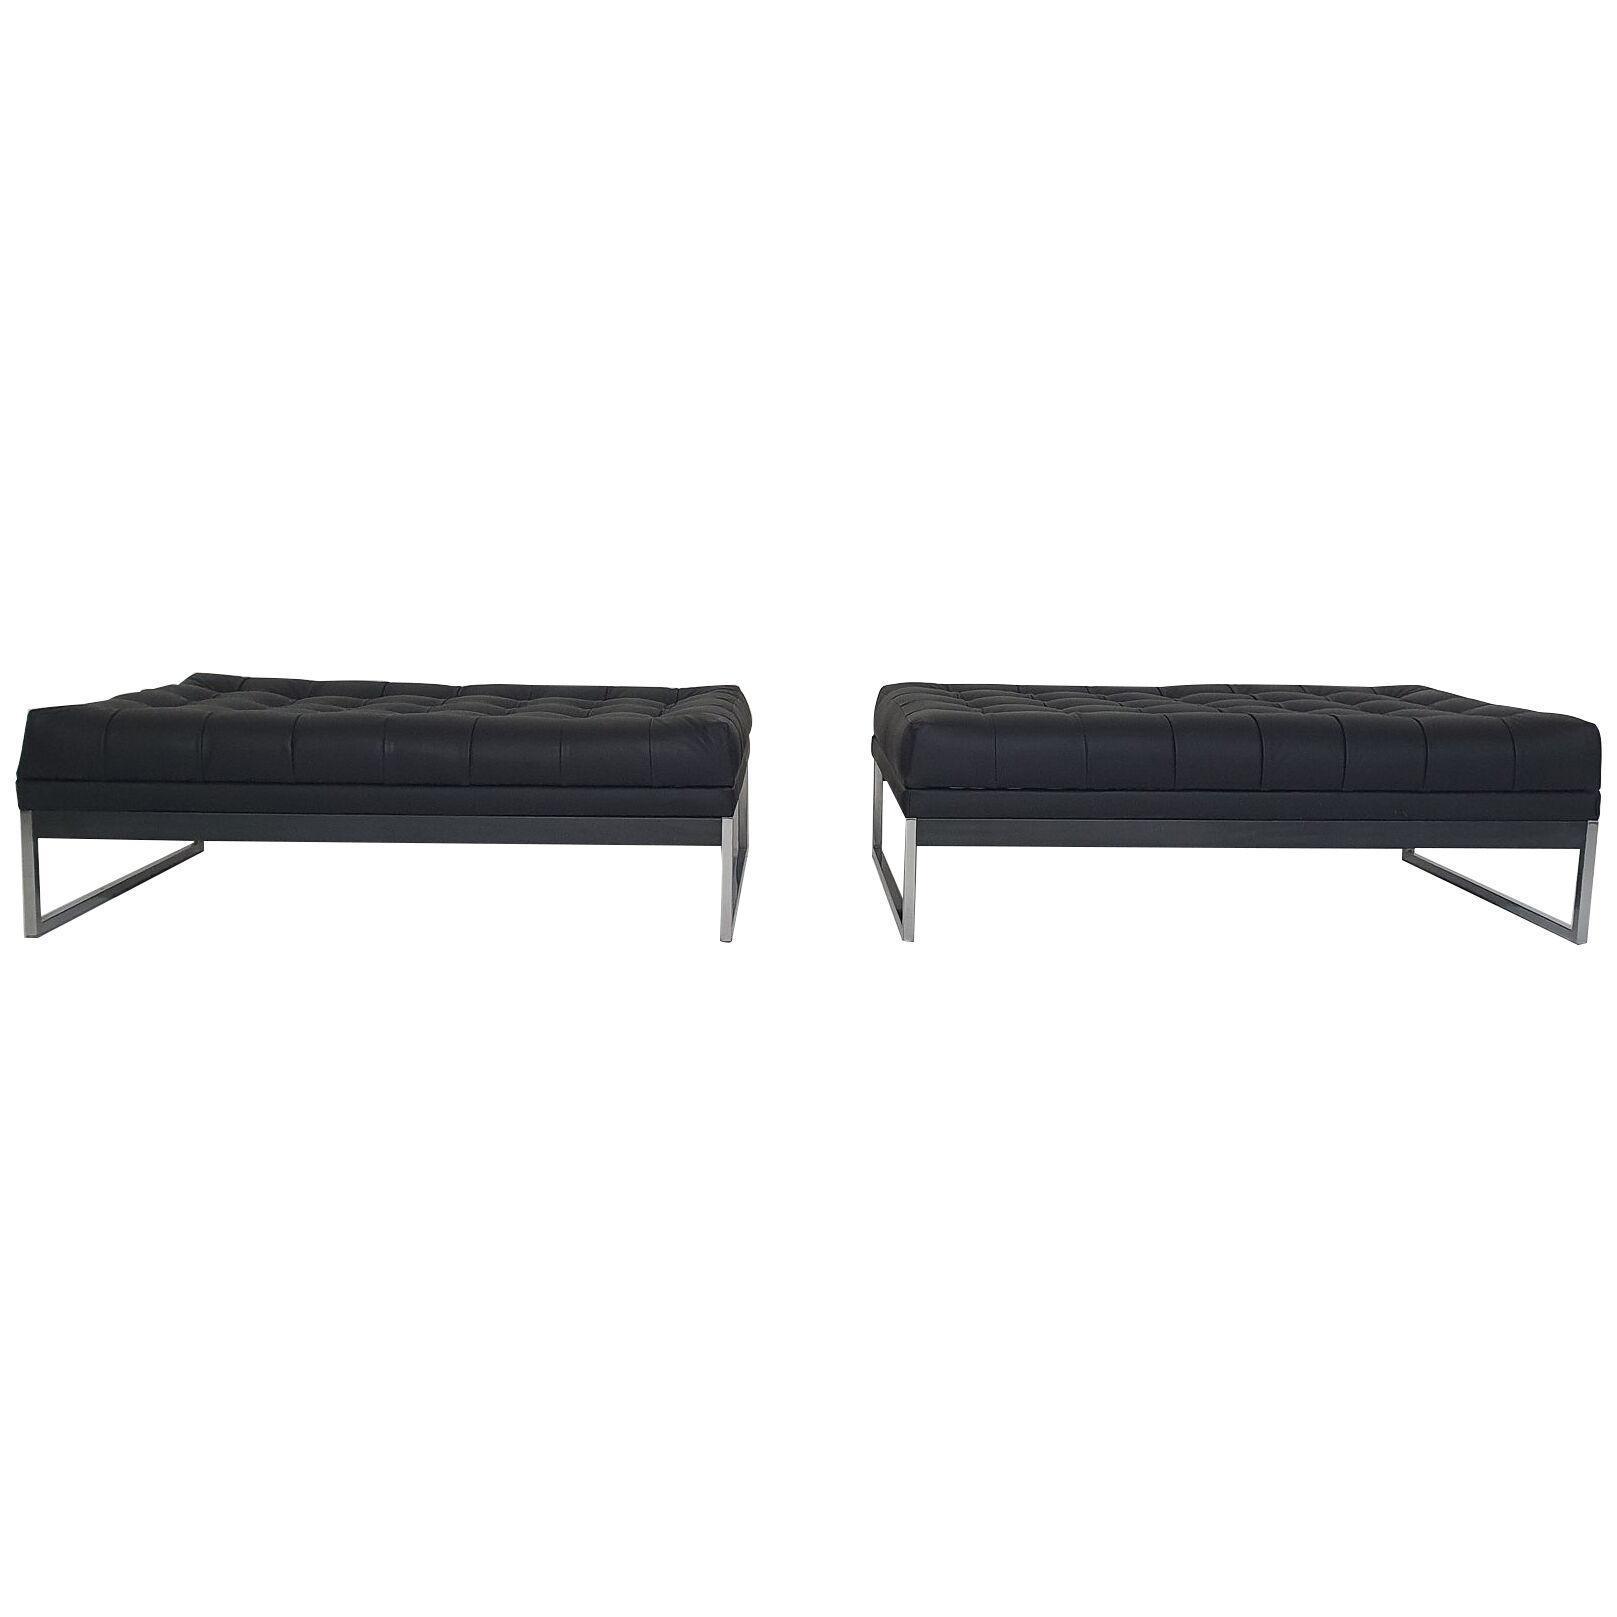 Set of two daybeds or benches by AP-originals , The Netherlands 1960's